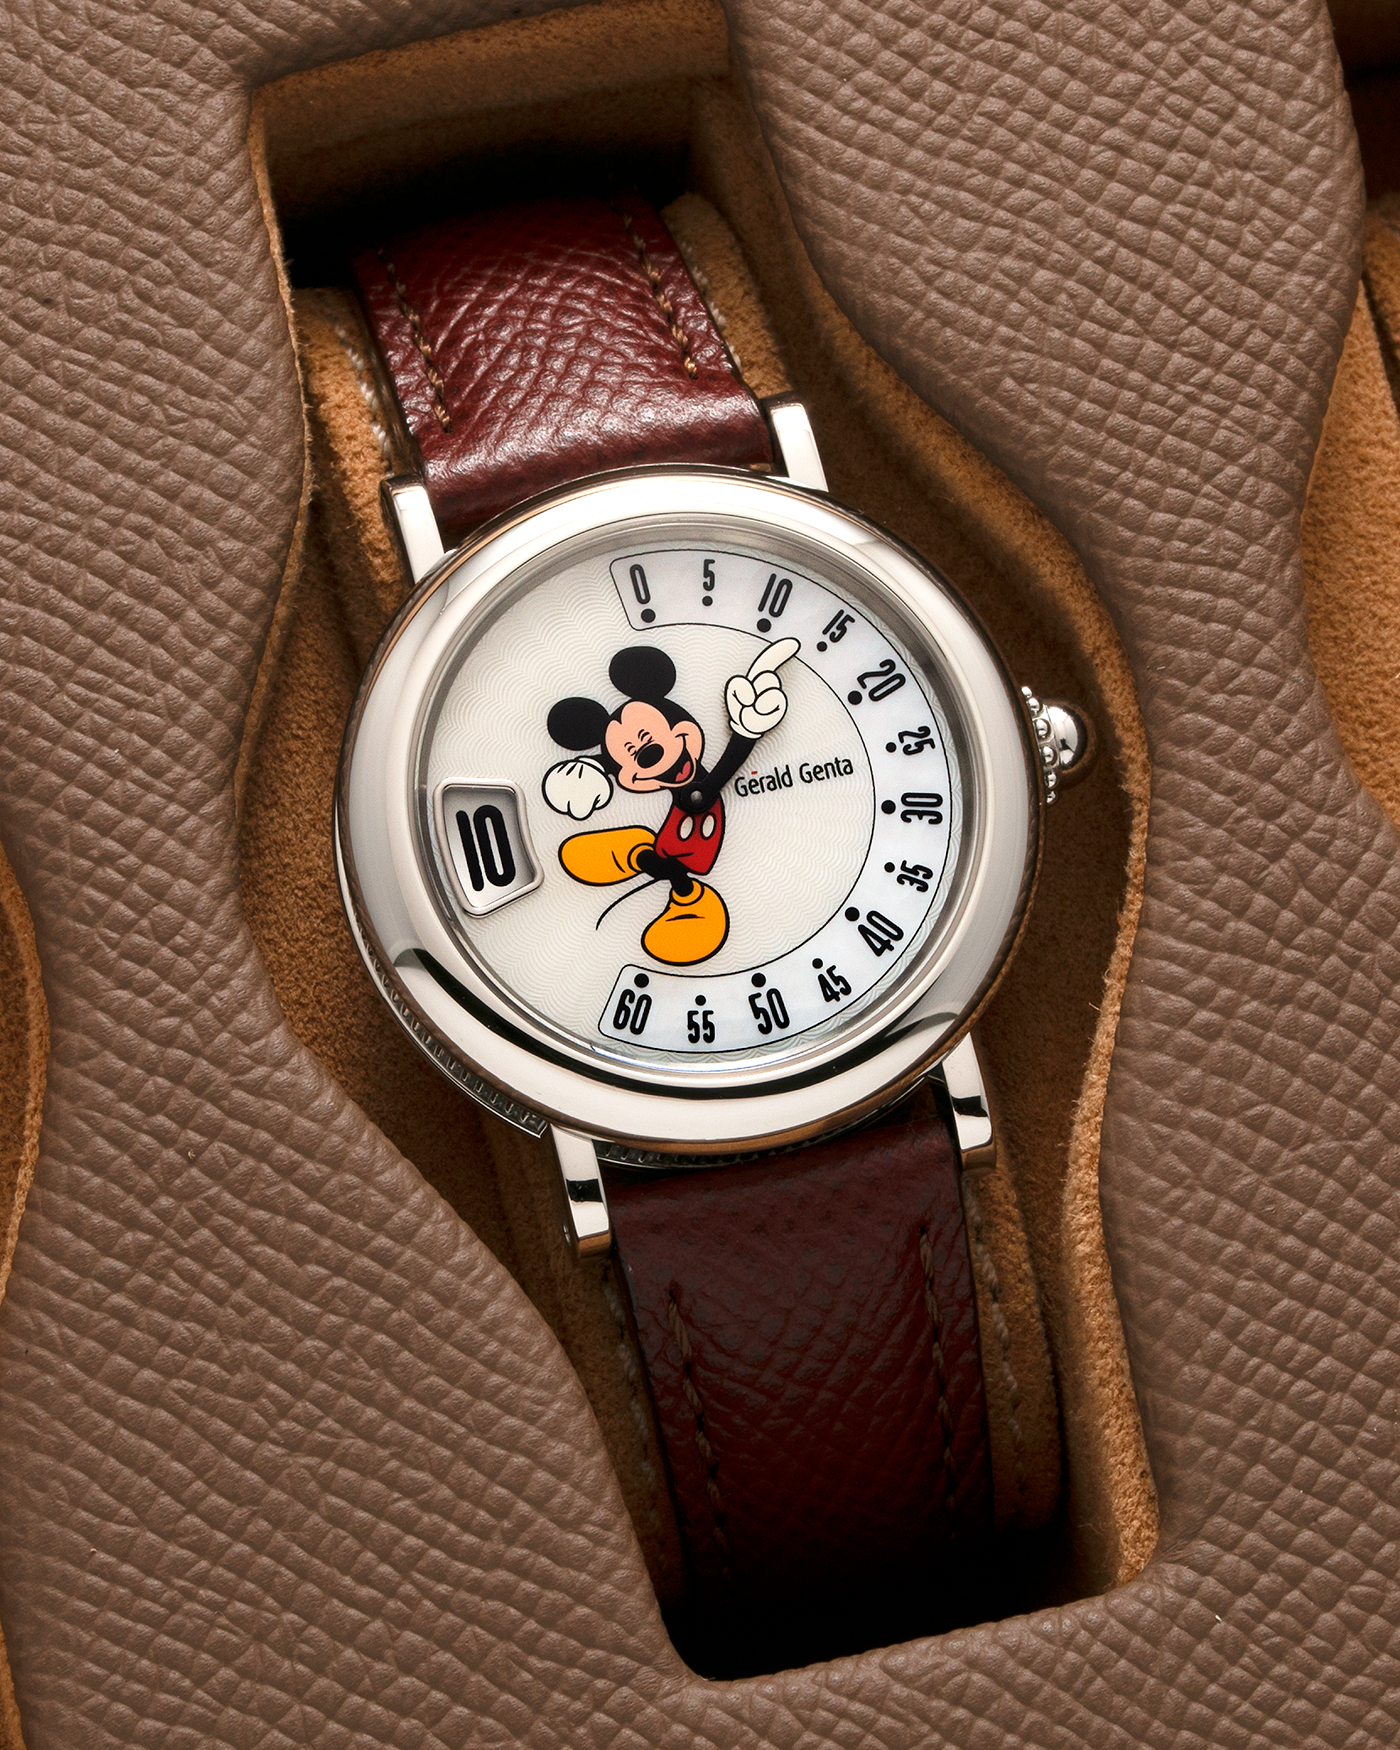 Brand: Gérald Genta Year: 2008 Model: Retro Fantasy ‘Mickey Mouse’ Reference Number: Ref.M.10.065.CR.BA Serial Number: 105XXX Material: Stainless Steel Case, Mother-of-Pearl dial Movement: Cal. ETA 2892A2, Self-Winding Case Diameter: 36mm Lug Width: 18mm Strap: Generic Oxblood Lizard Leather Strap with Signed Stainless Steel Tang Buckle, with additional Gérald Genta Burgundy Red Alligator Leather Strap